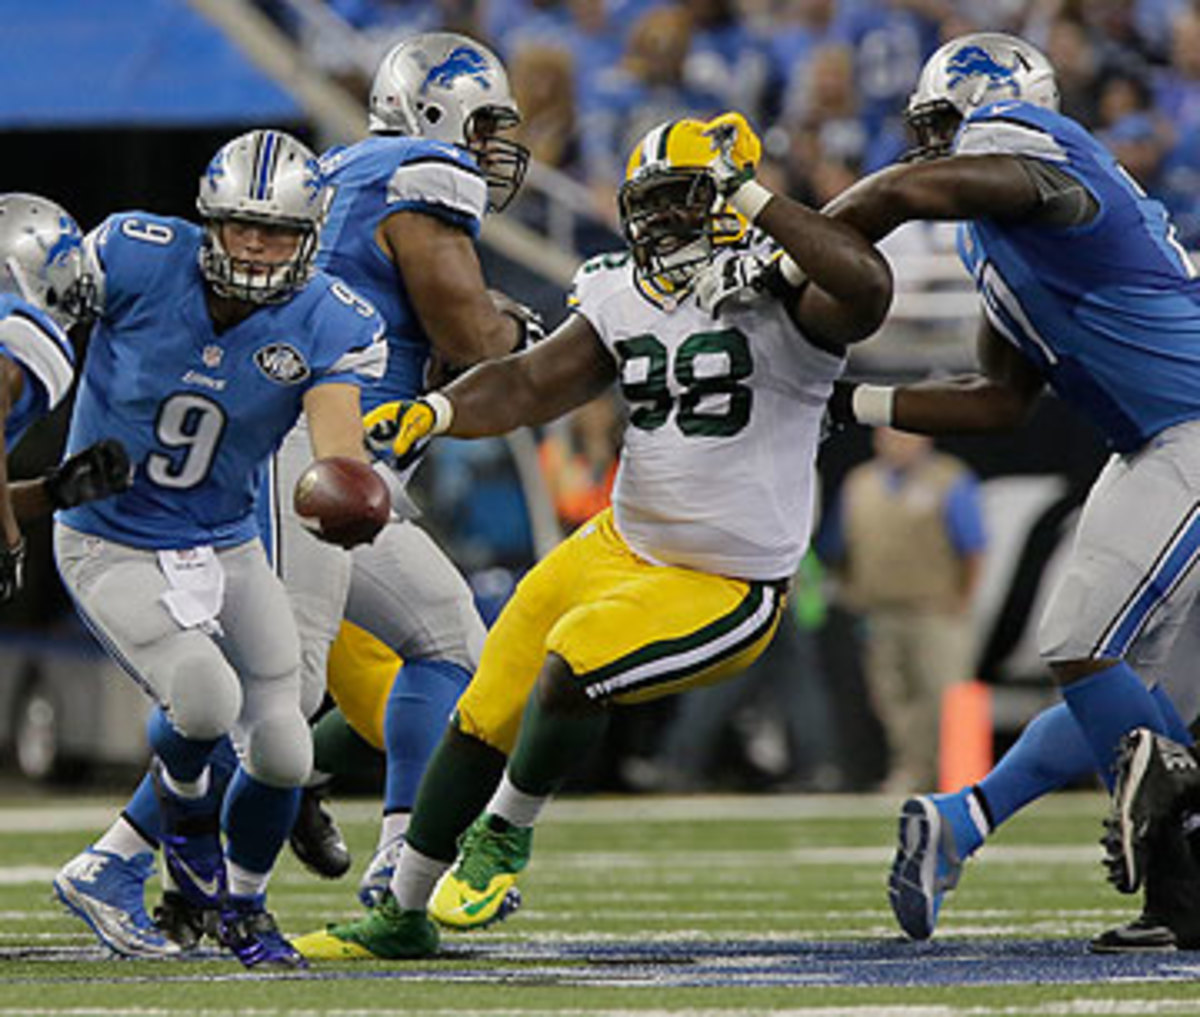 Letroy Guion's ability to play run defense is vital to the Packers' title hopes. (Duane Burleson/AP)